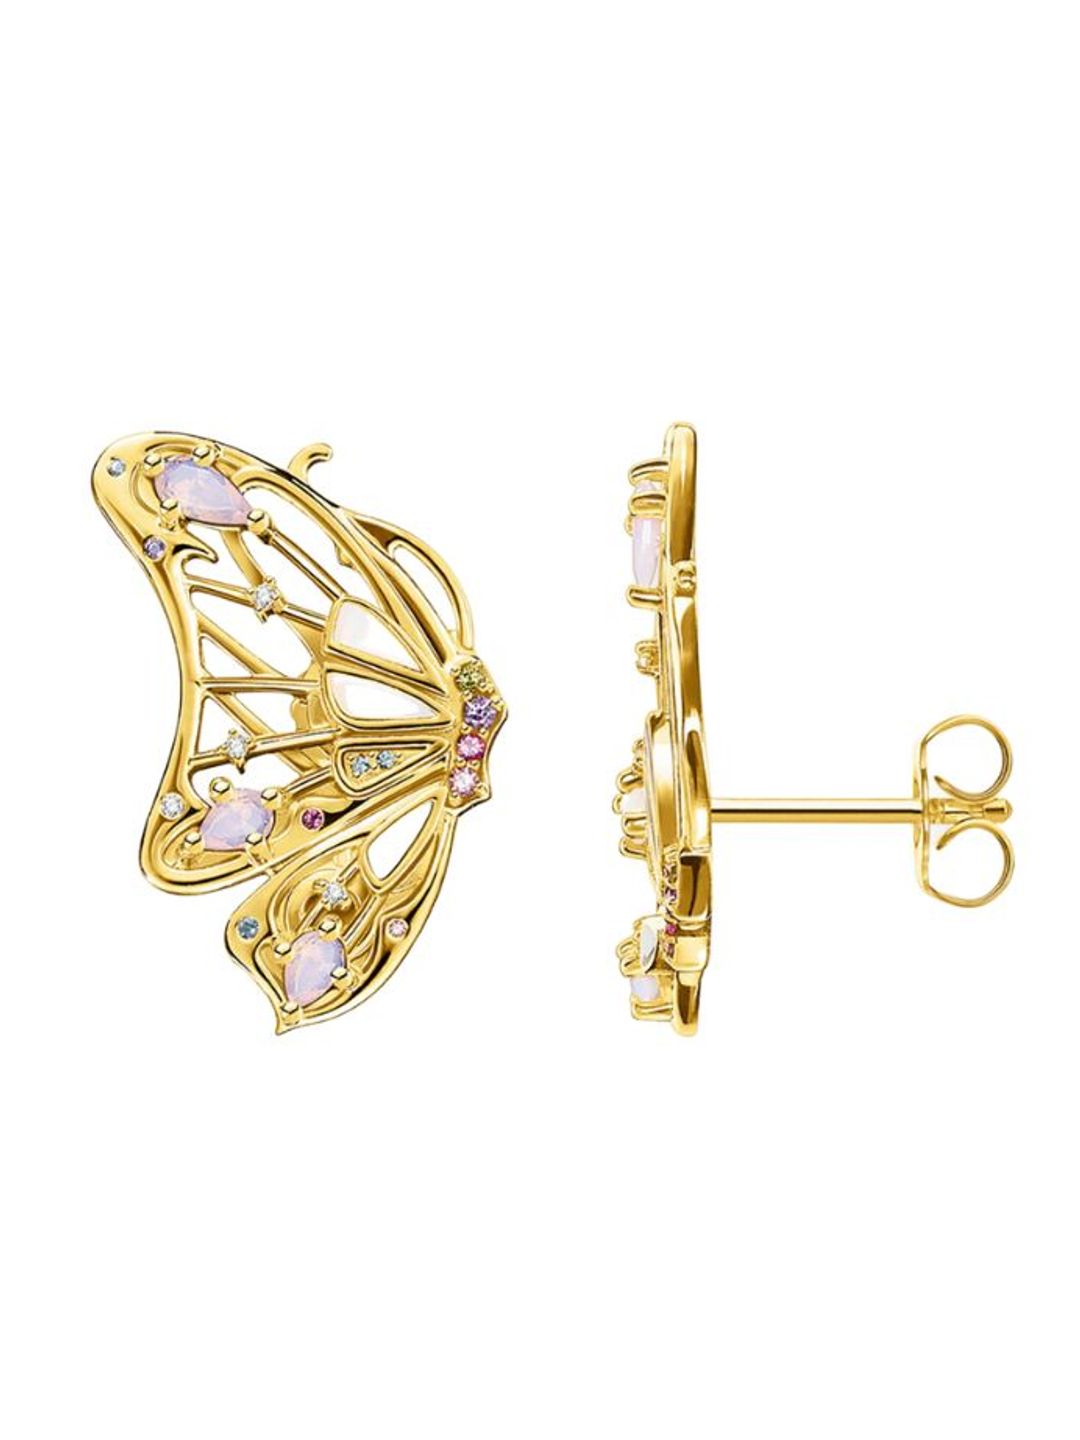 Thomas Sabo gold butterfly earrings 